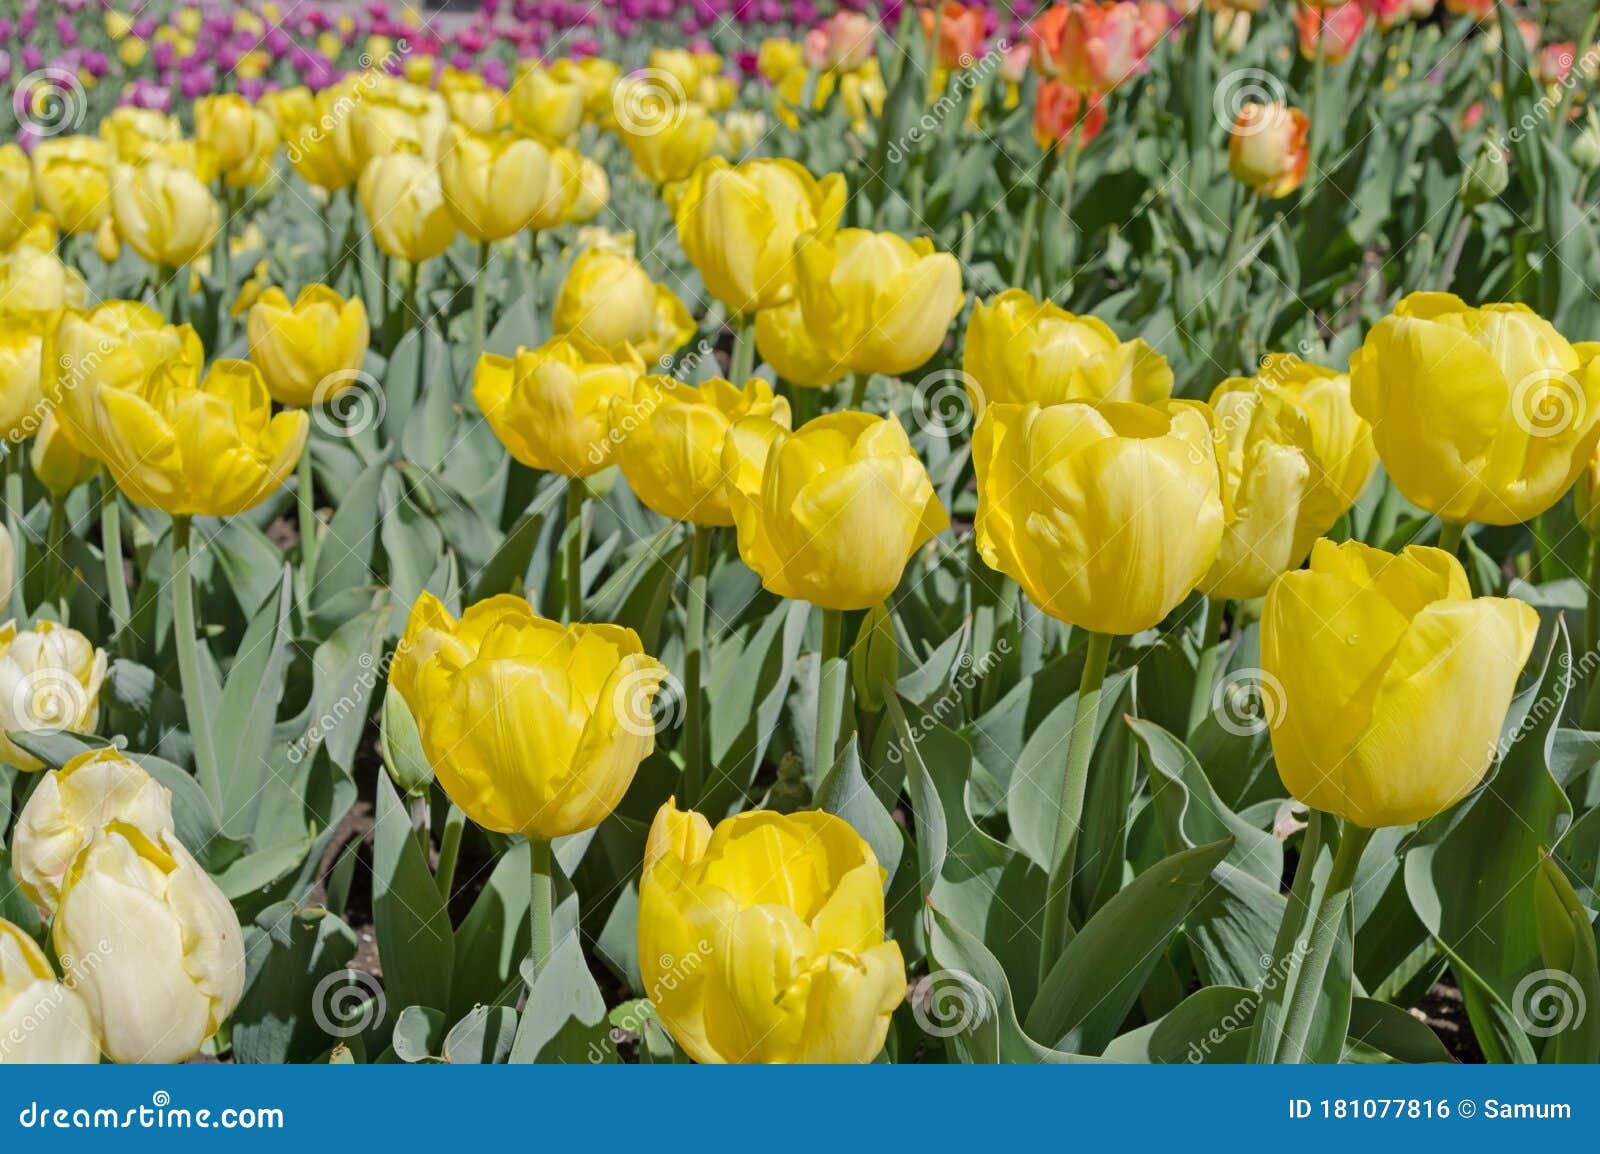 Yellow tulips on flowerbed stock photo. Image of multicolored - 181077816